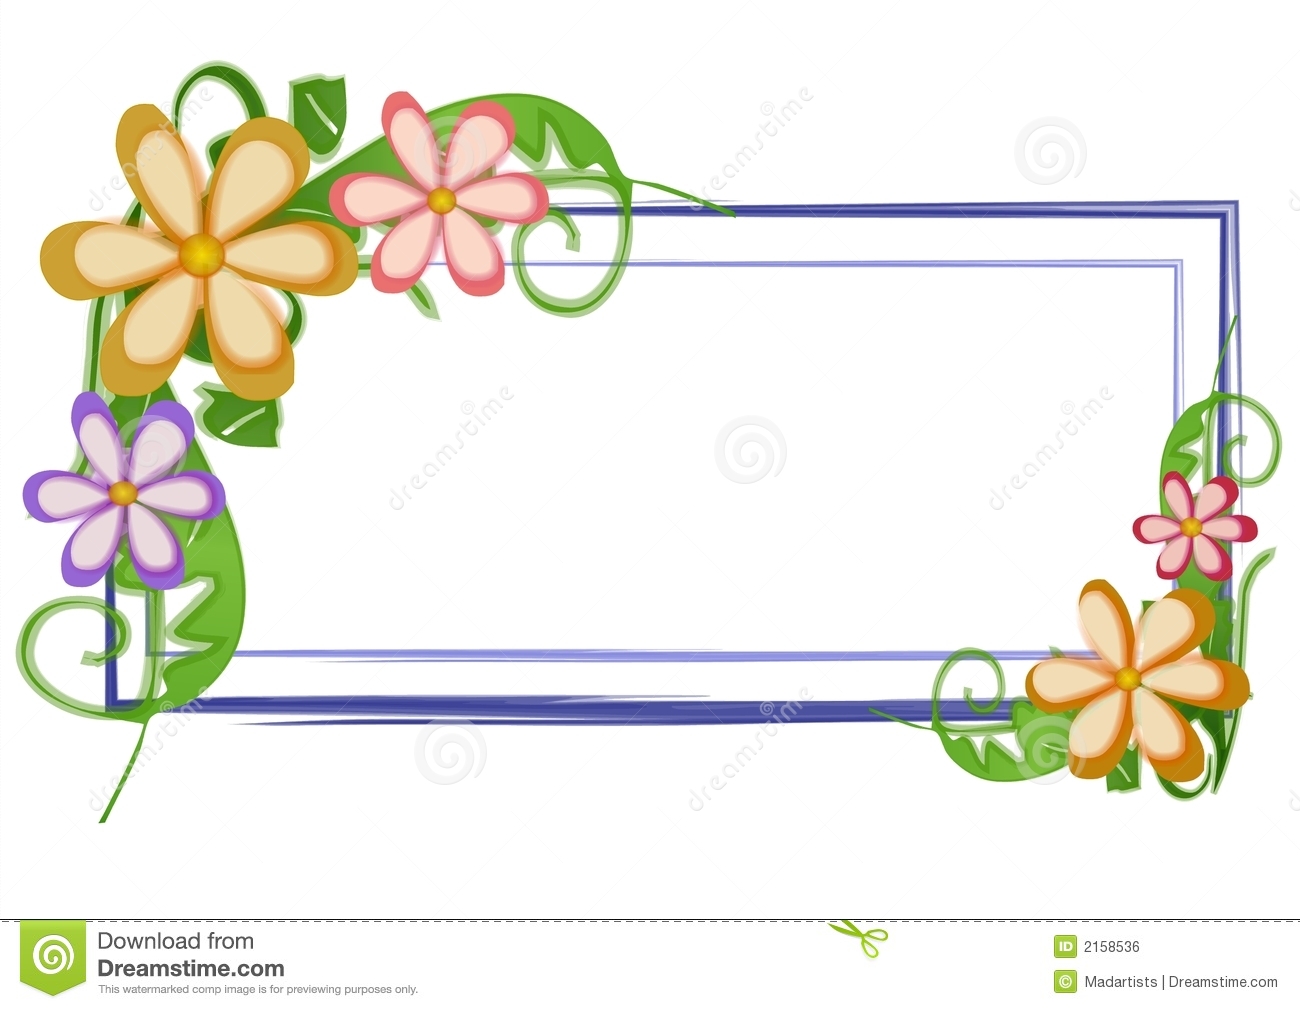 Web Page Logo Flowers Floral Royalty Free Stock Image   Image  2158536